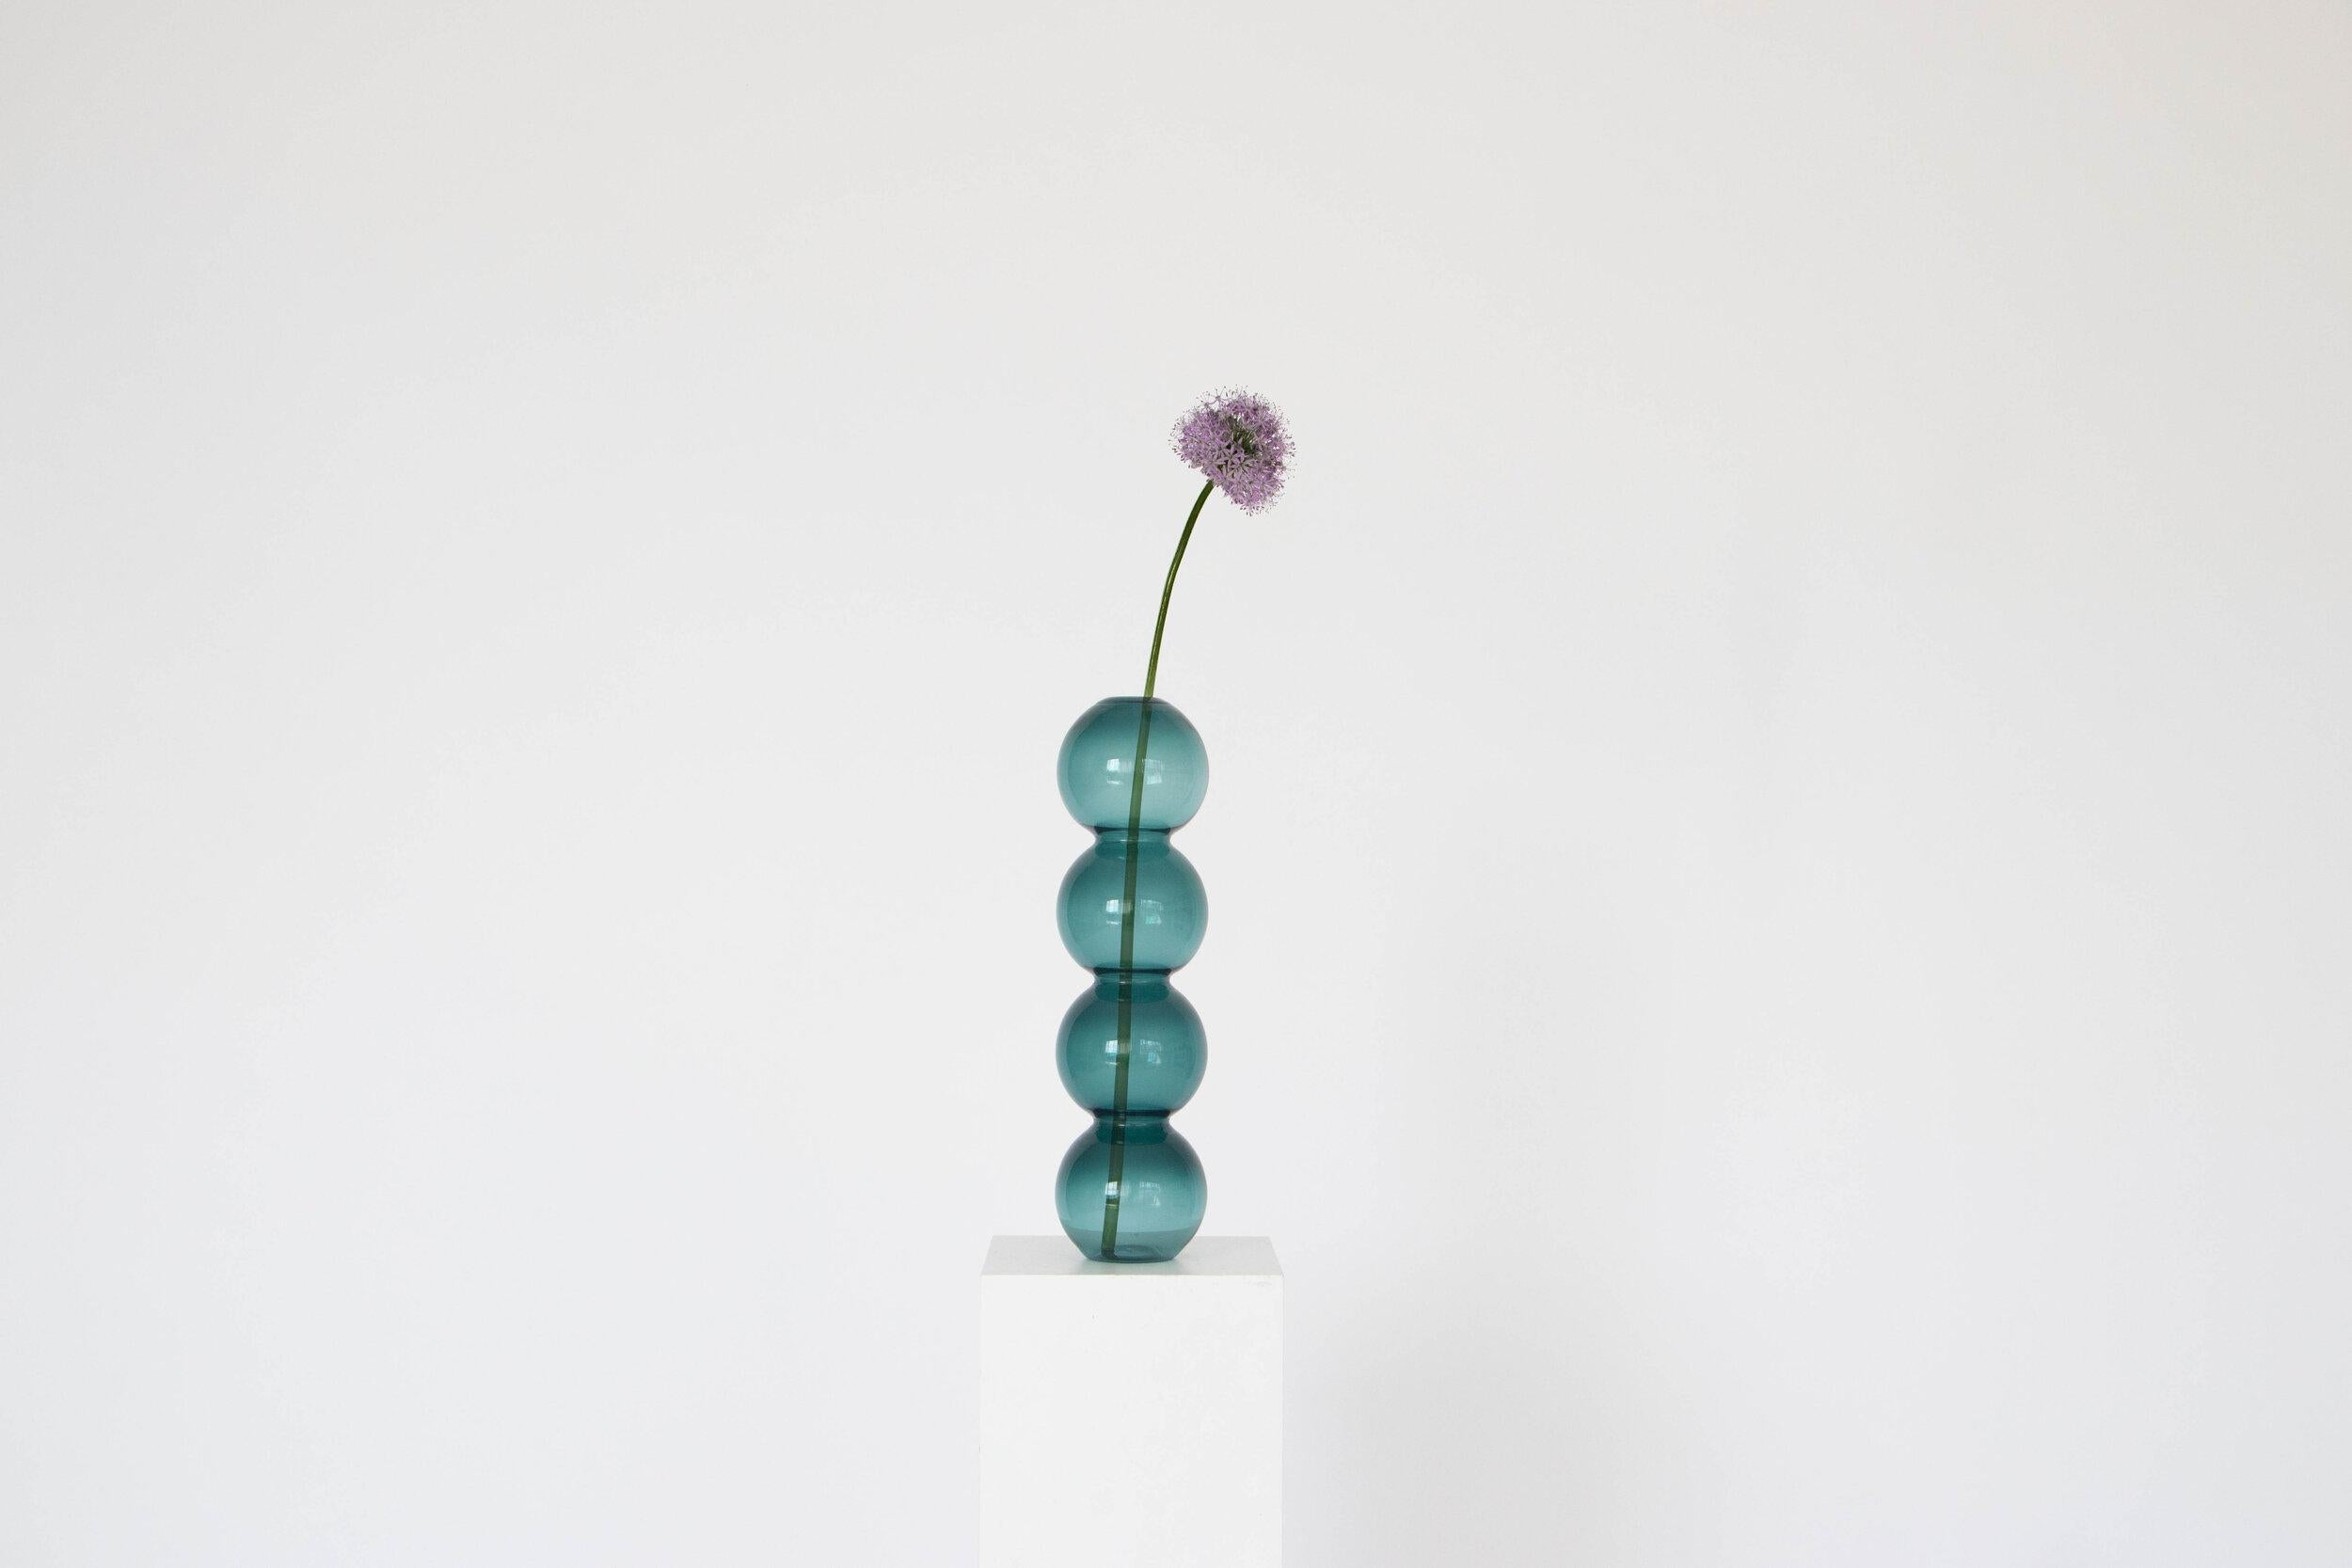 A set of 7 Teal bubble vase by Valeria Vasi
Handmade in Barcelona, 2021
Materials: glass
Dimensions: 38 x 10 cm
Also available in: clear, pink, blue. 

A sculptural vase entirely crafted in Barcelona by a skillful local artisan using a glass